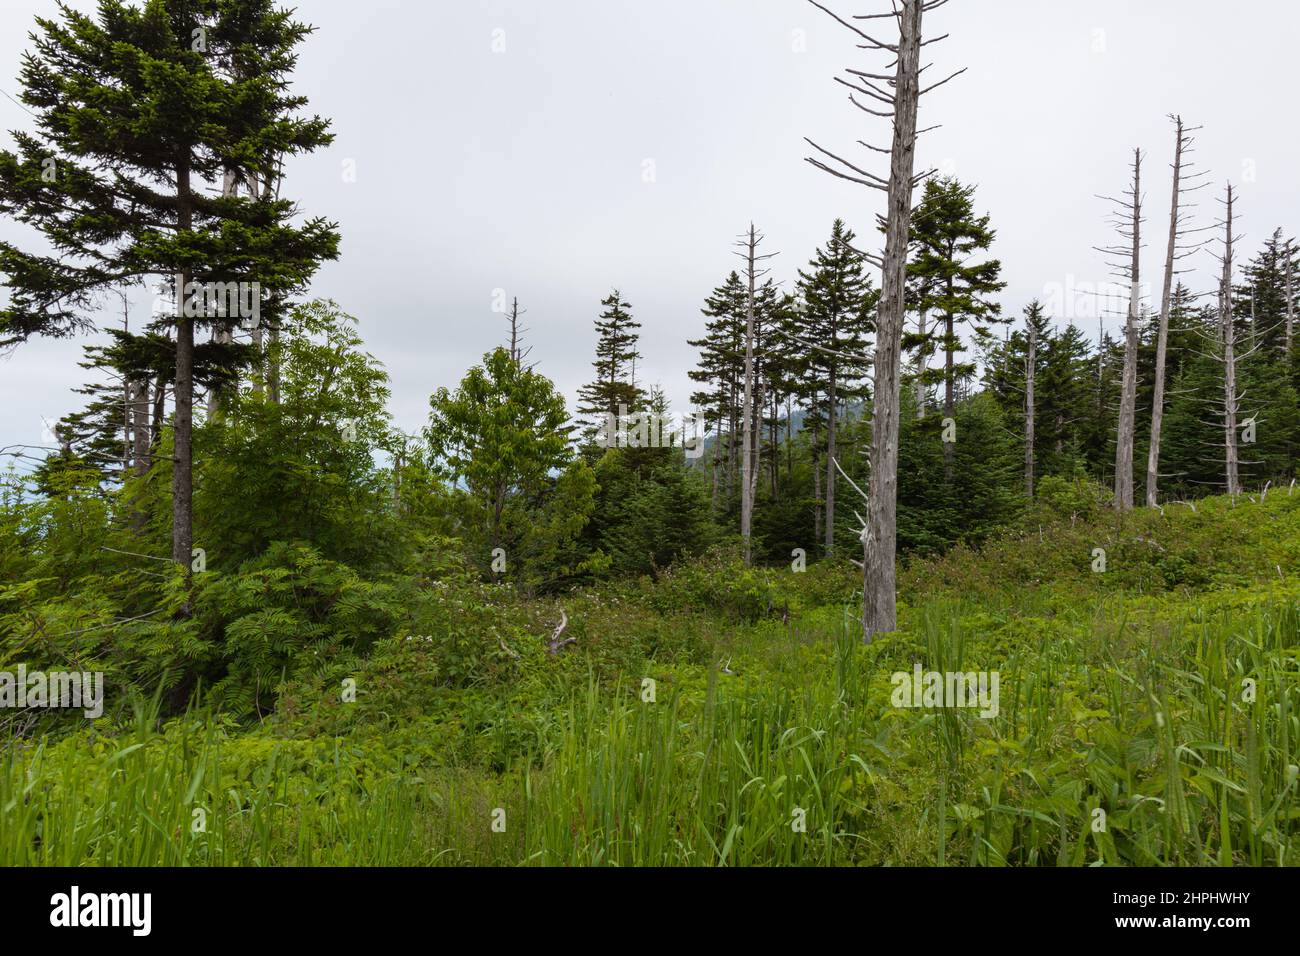 Wechselnde Umgebung in der Nähe des Clingmans Dome im Great Smoky Mountains National Park Stockfoto